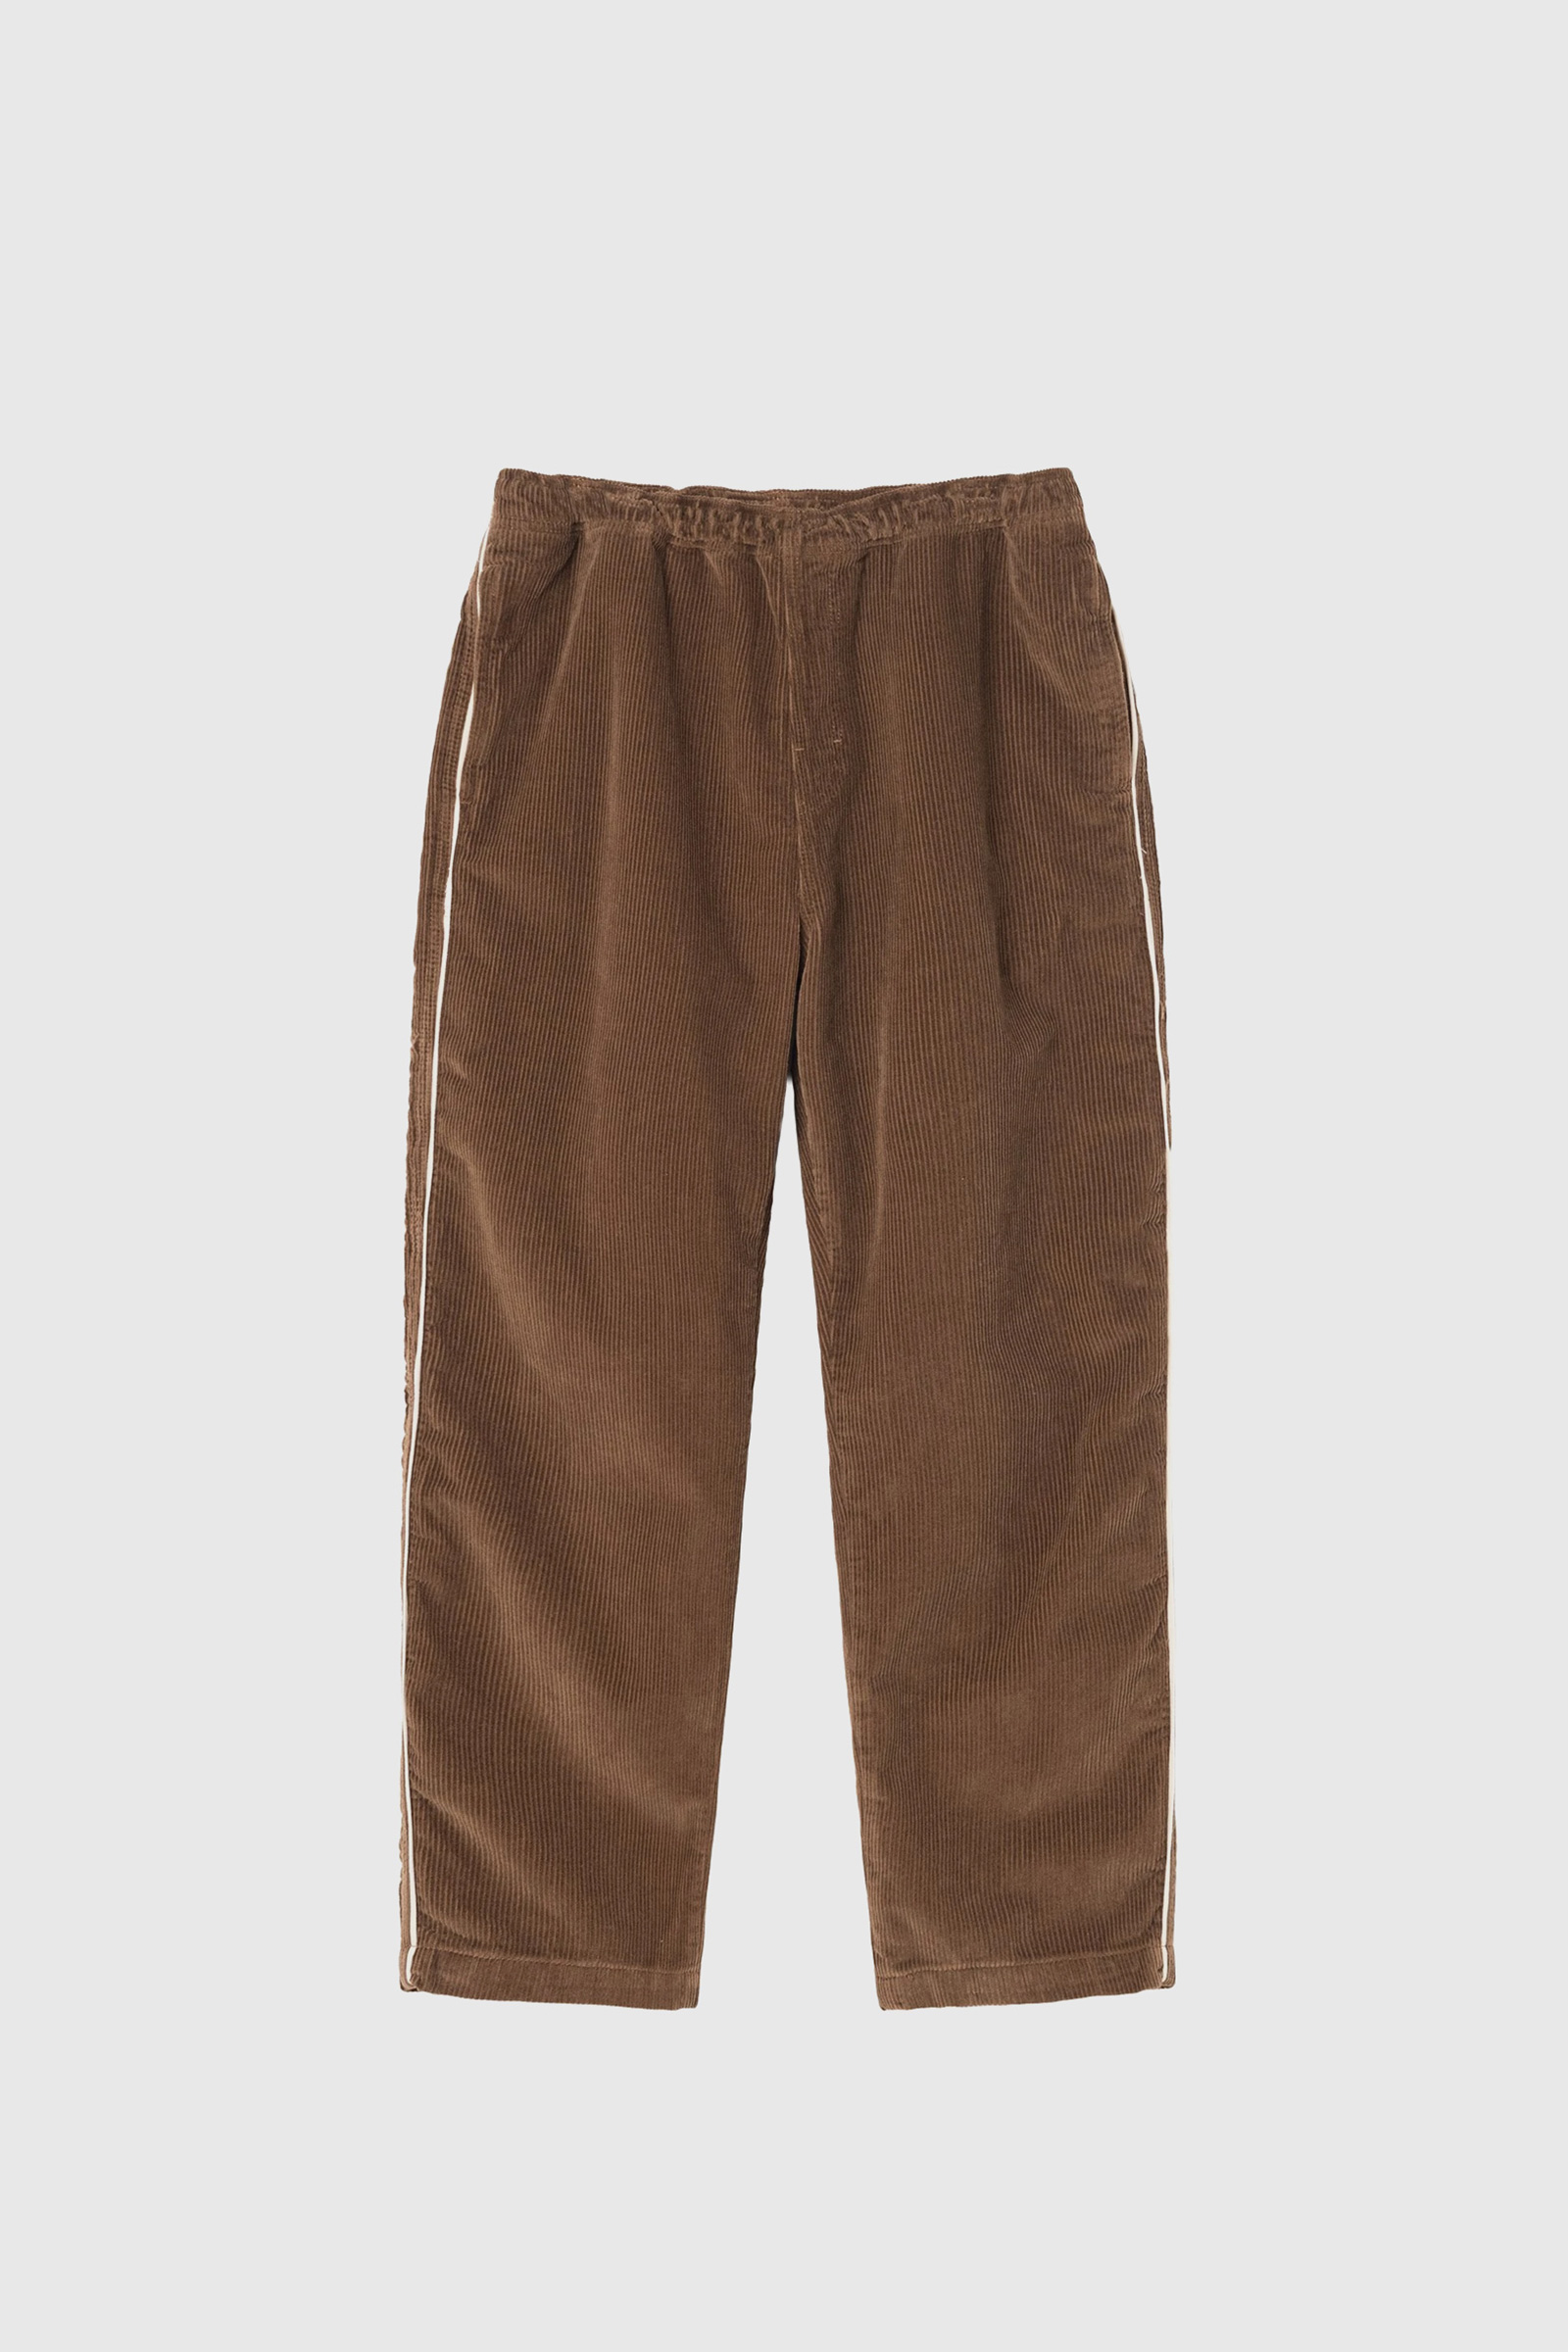 Stüssy Corduroy Relaxed Pant Brown | WoodWood.com